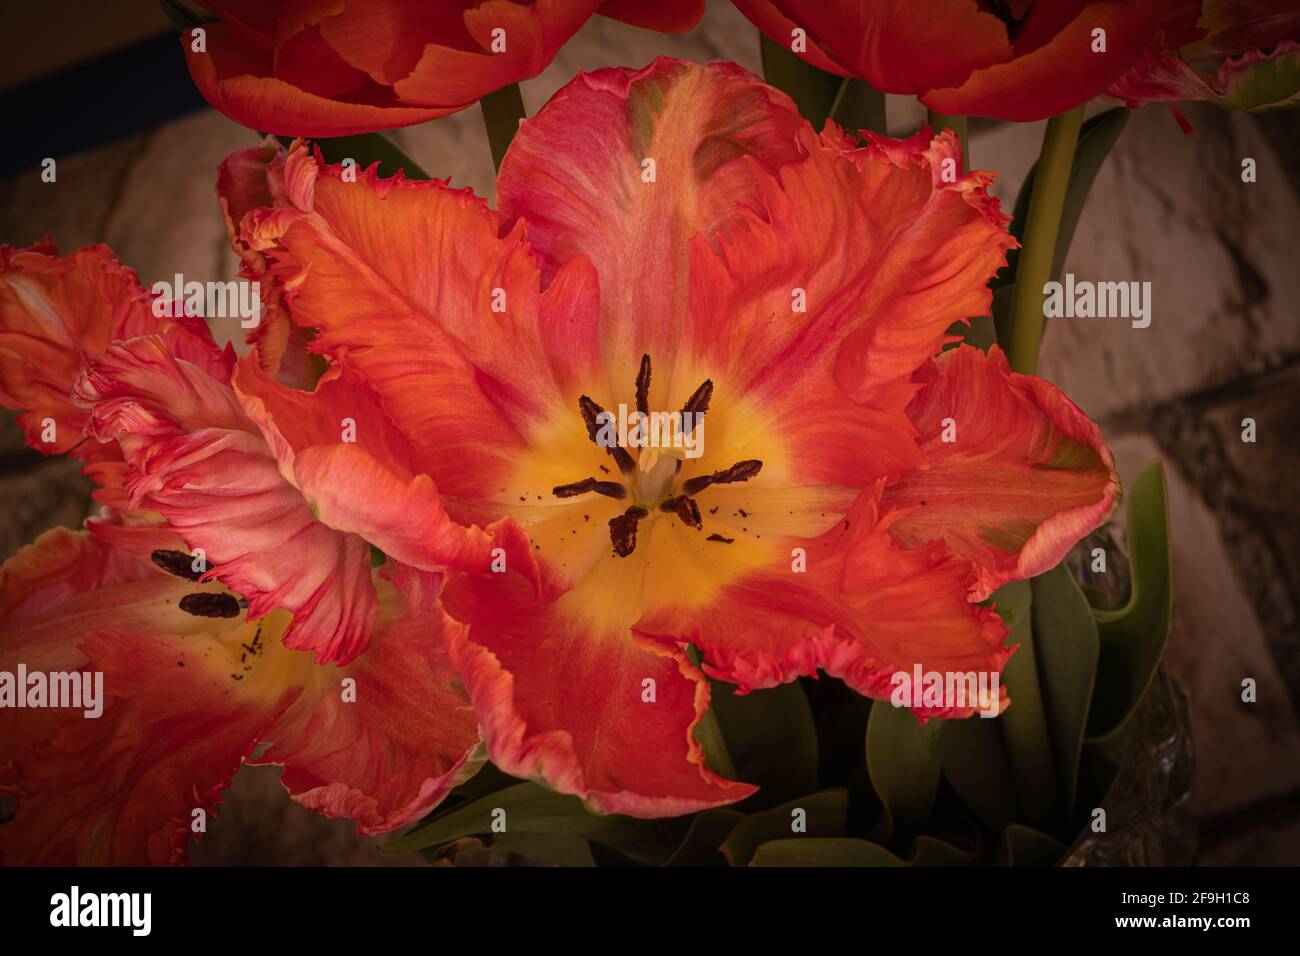 close-up view of red tulip into a vase Stock Photo